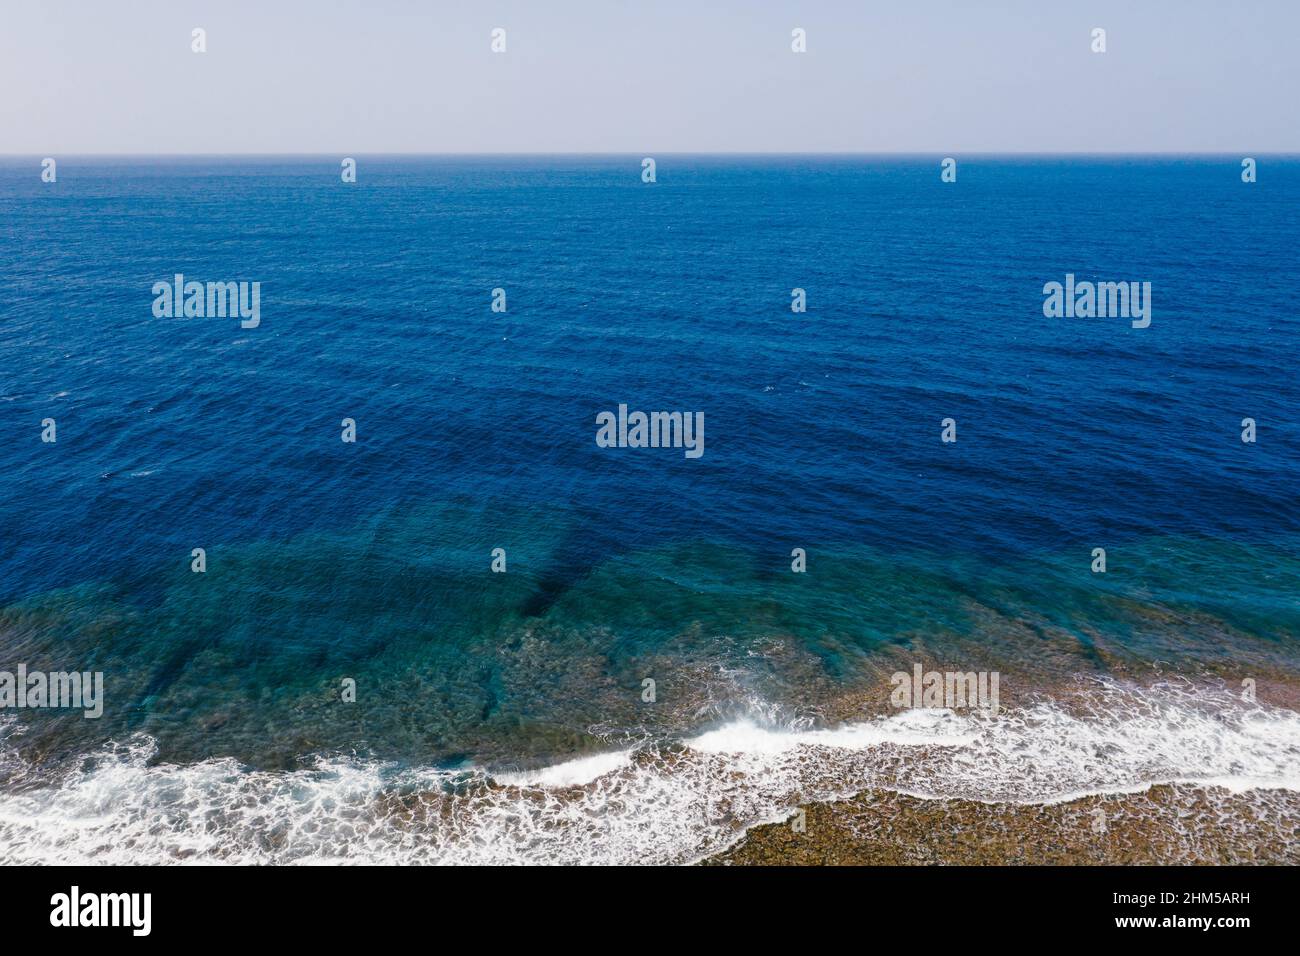 Deep blue ocean landscape with waves and coral reefs Stock Photo